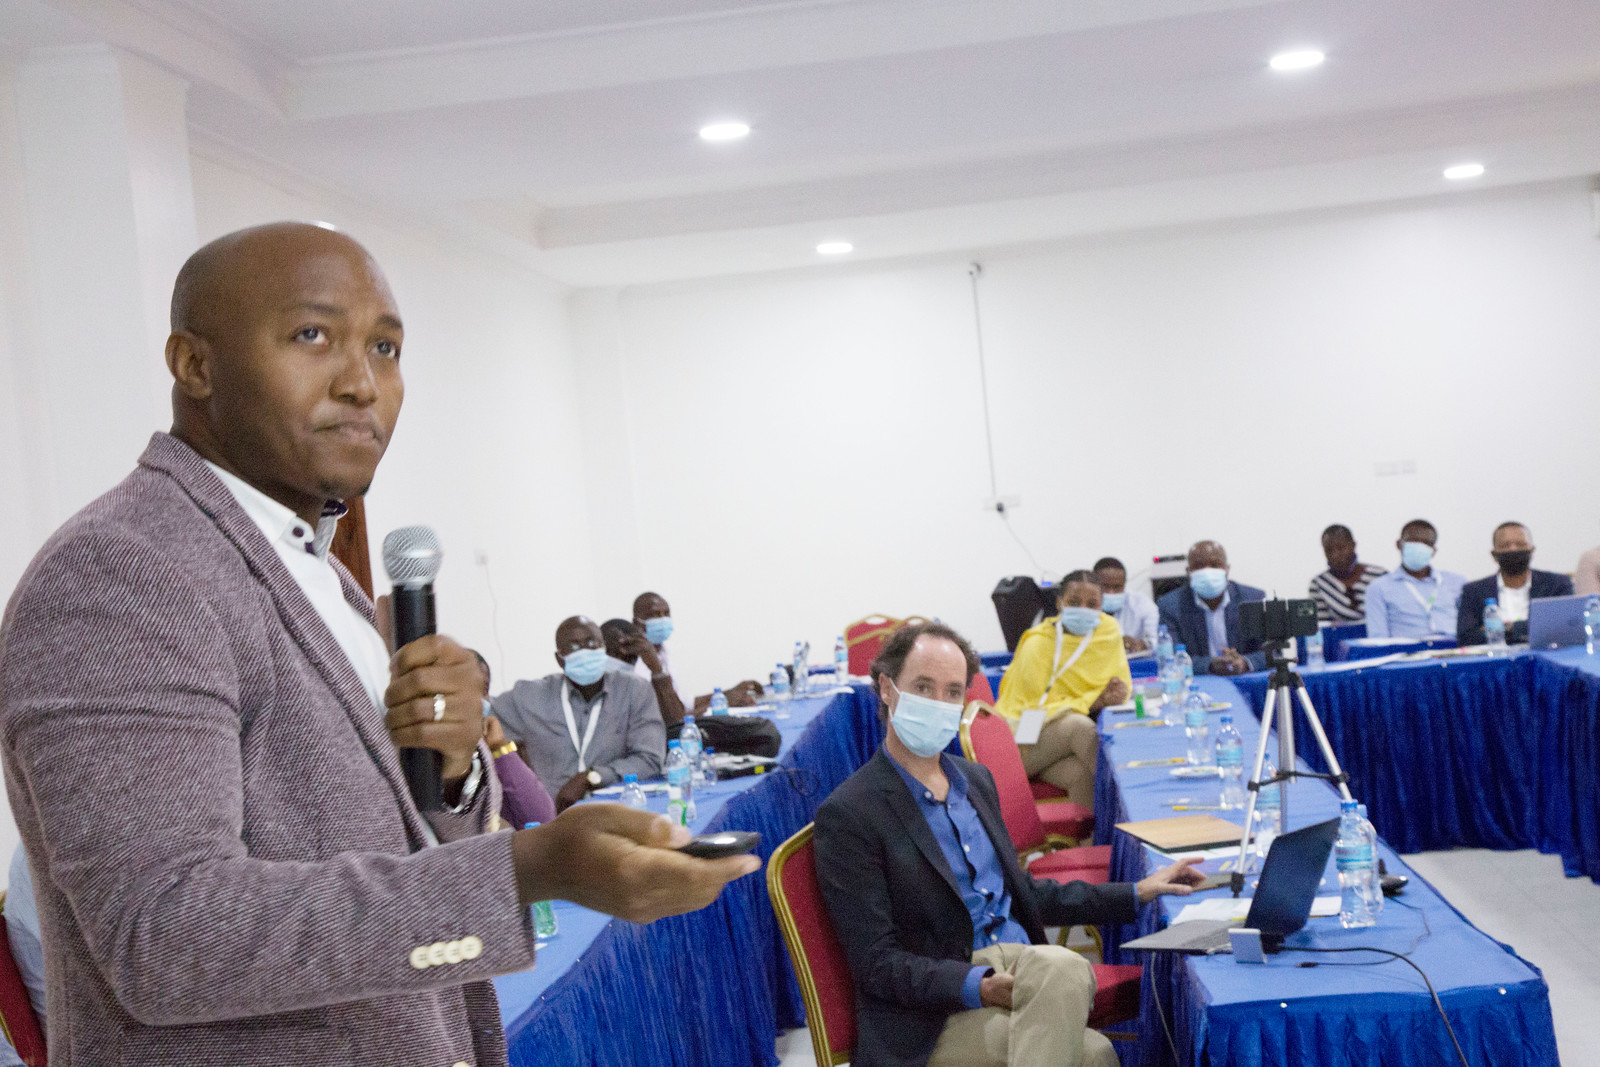 ENGAGEMENT: Ifakara project hosts multi-stakeholder meeting in Dodoma